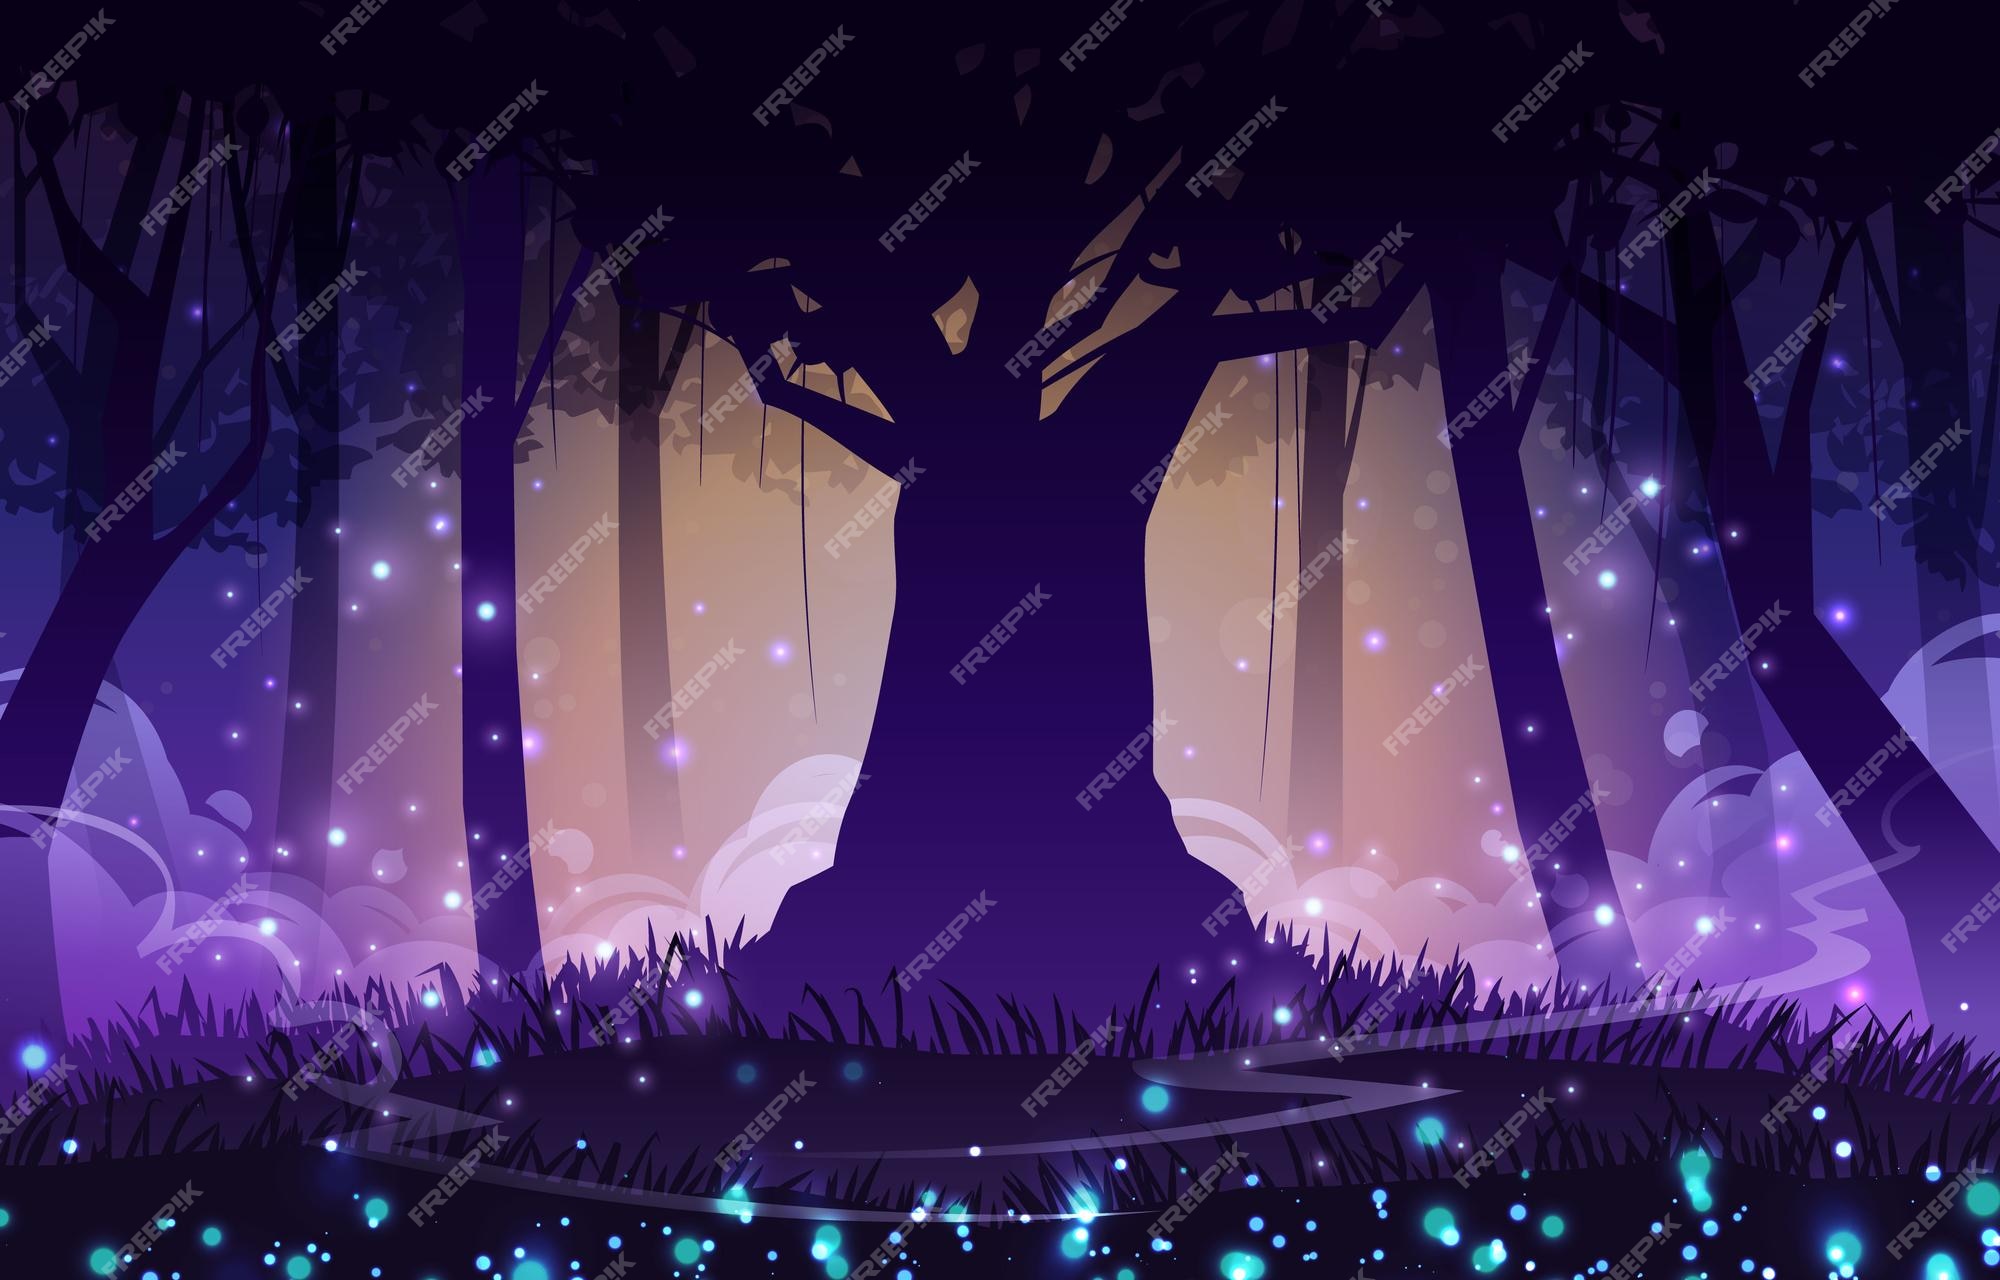 Premium Vector | Forest wallpaper at night